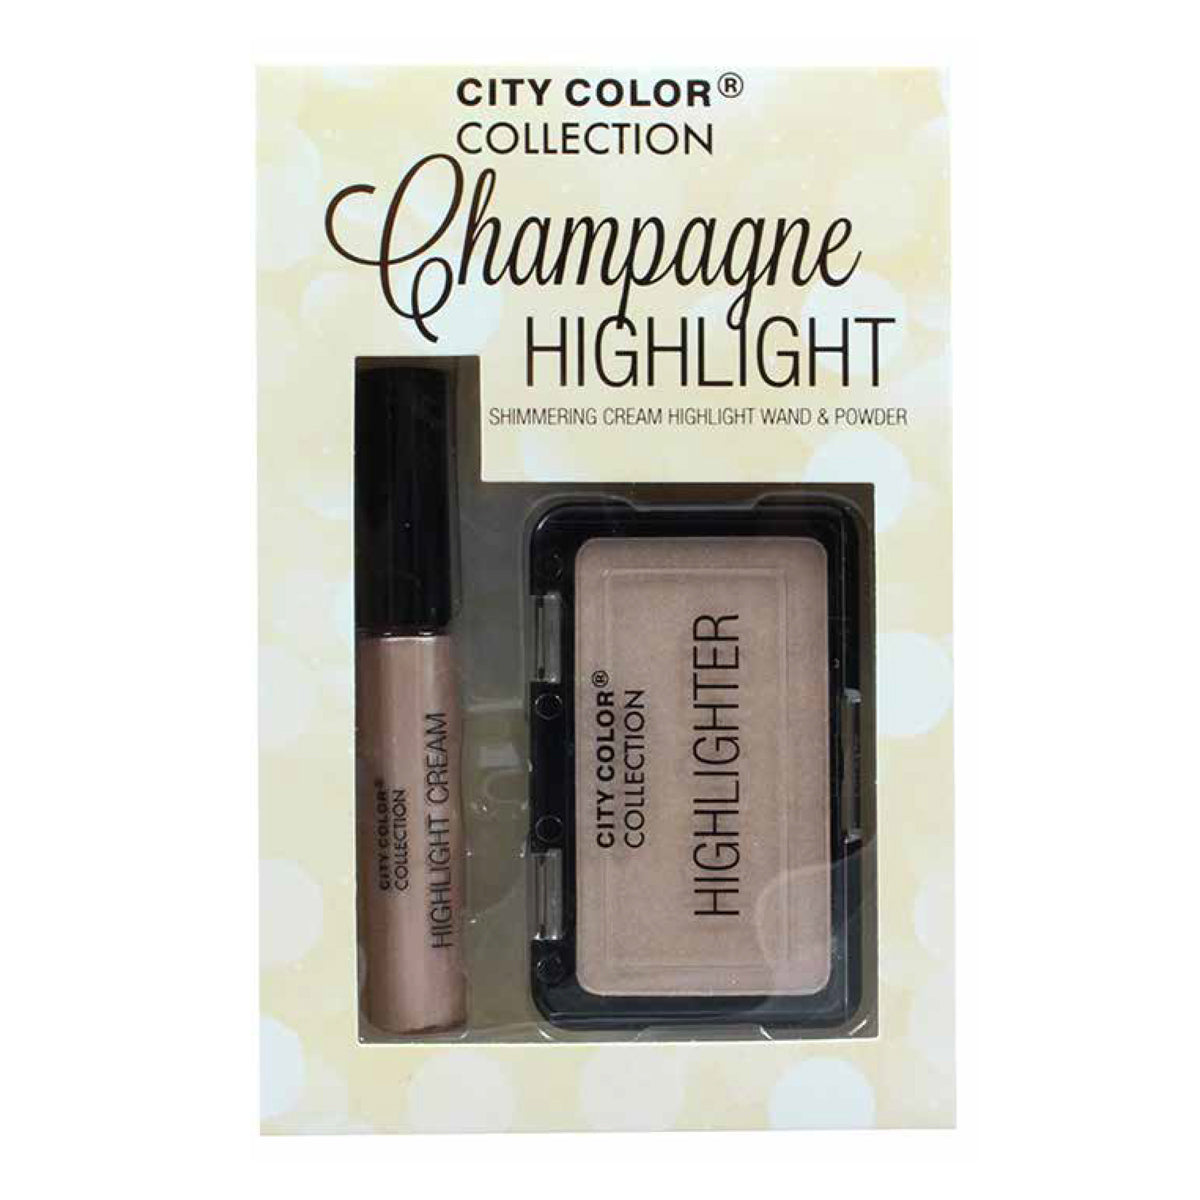 CITY COLOR Collection Champagne Highlight Set